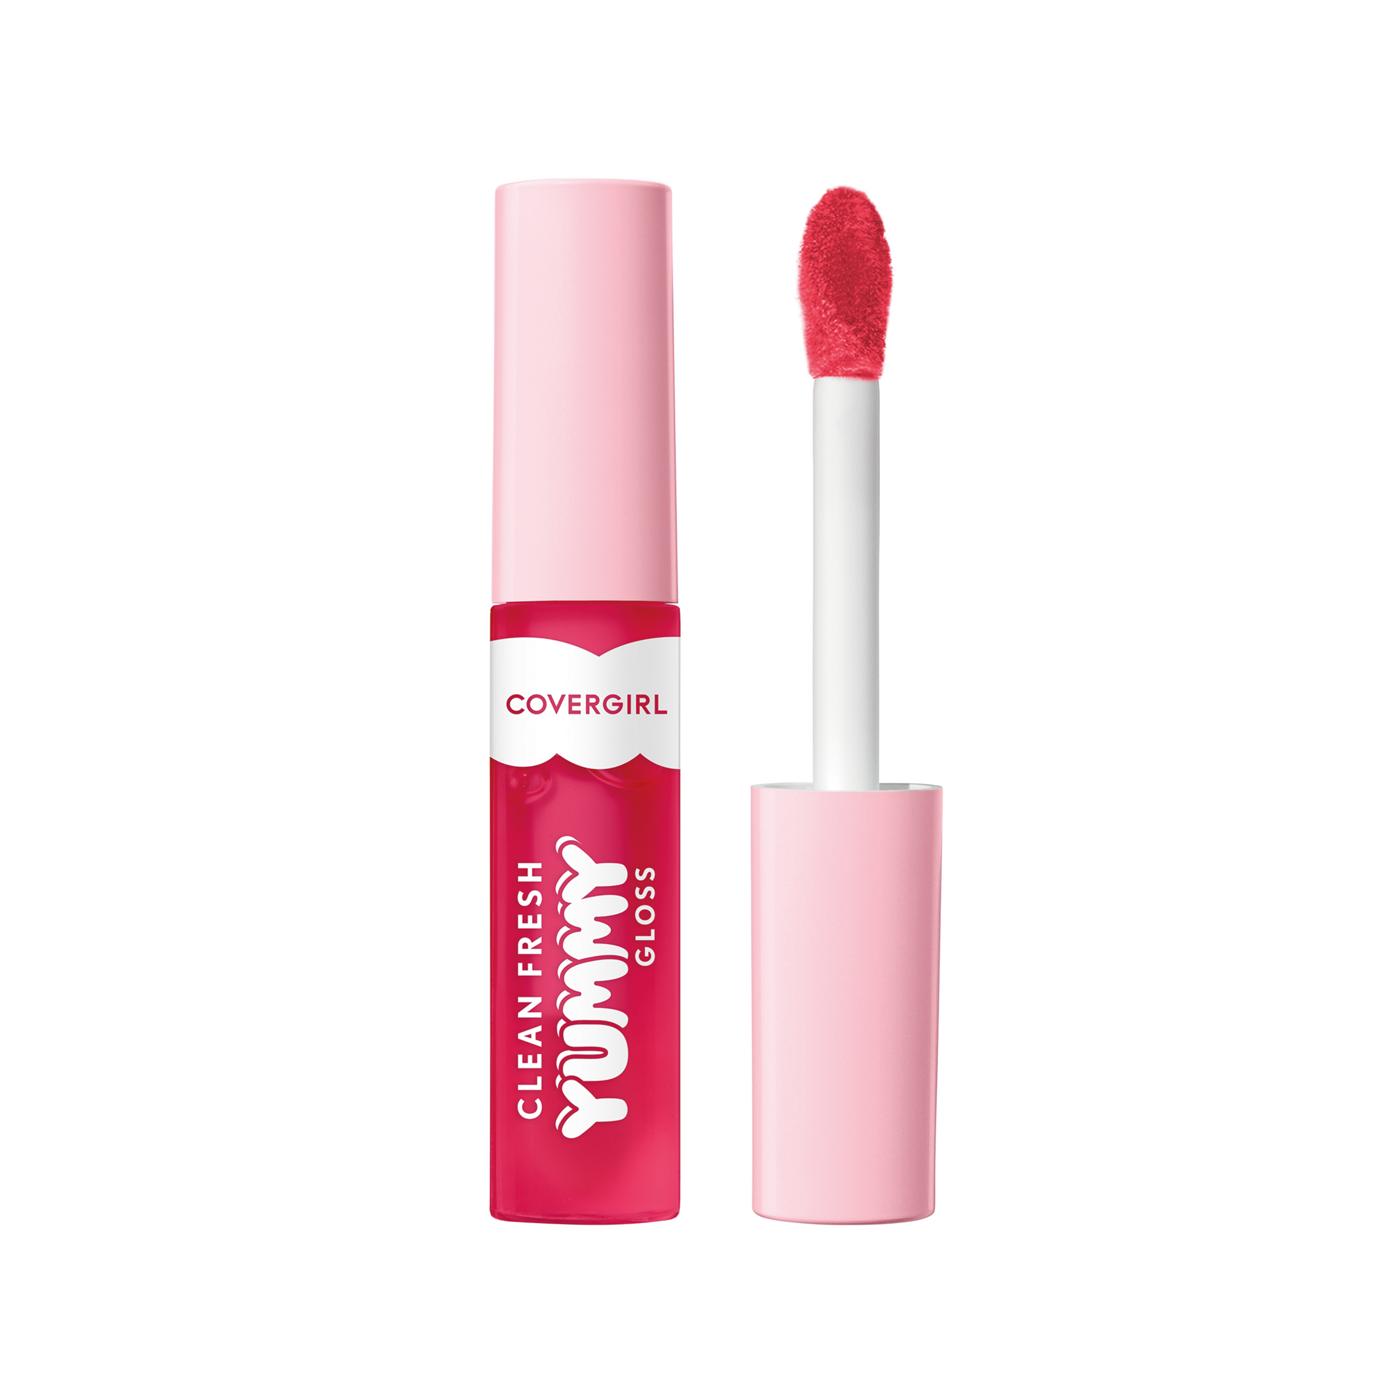 Covergirl Clean Fresh Yummy Lip Gloss - You're Just Jelly; image 1 of 10